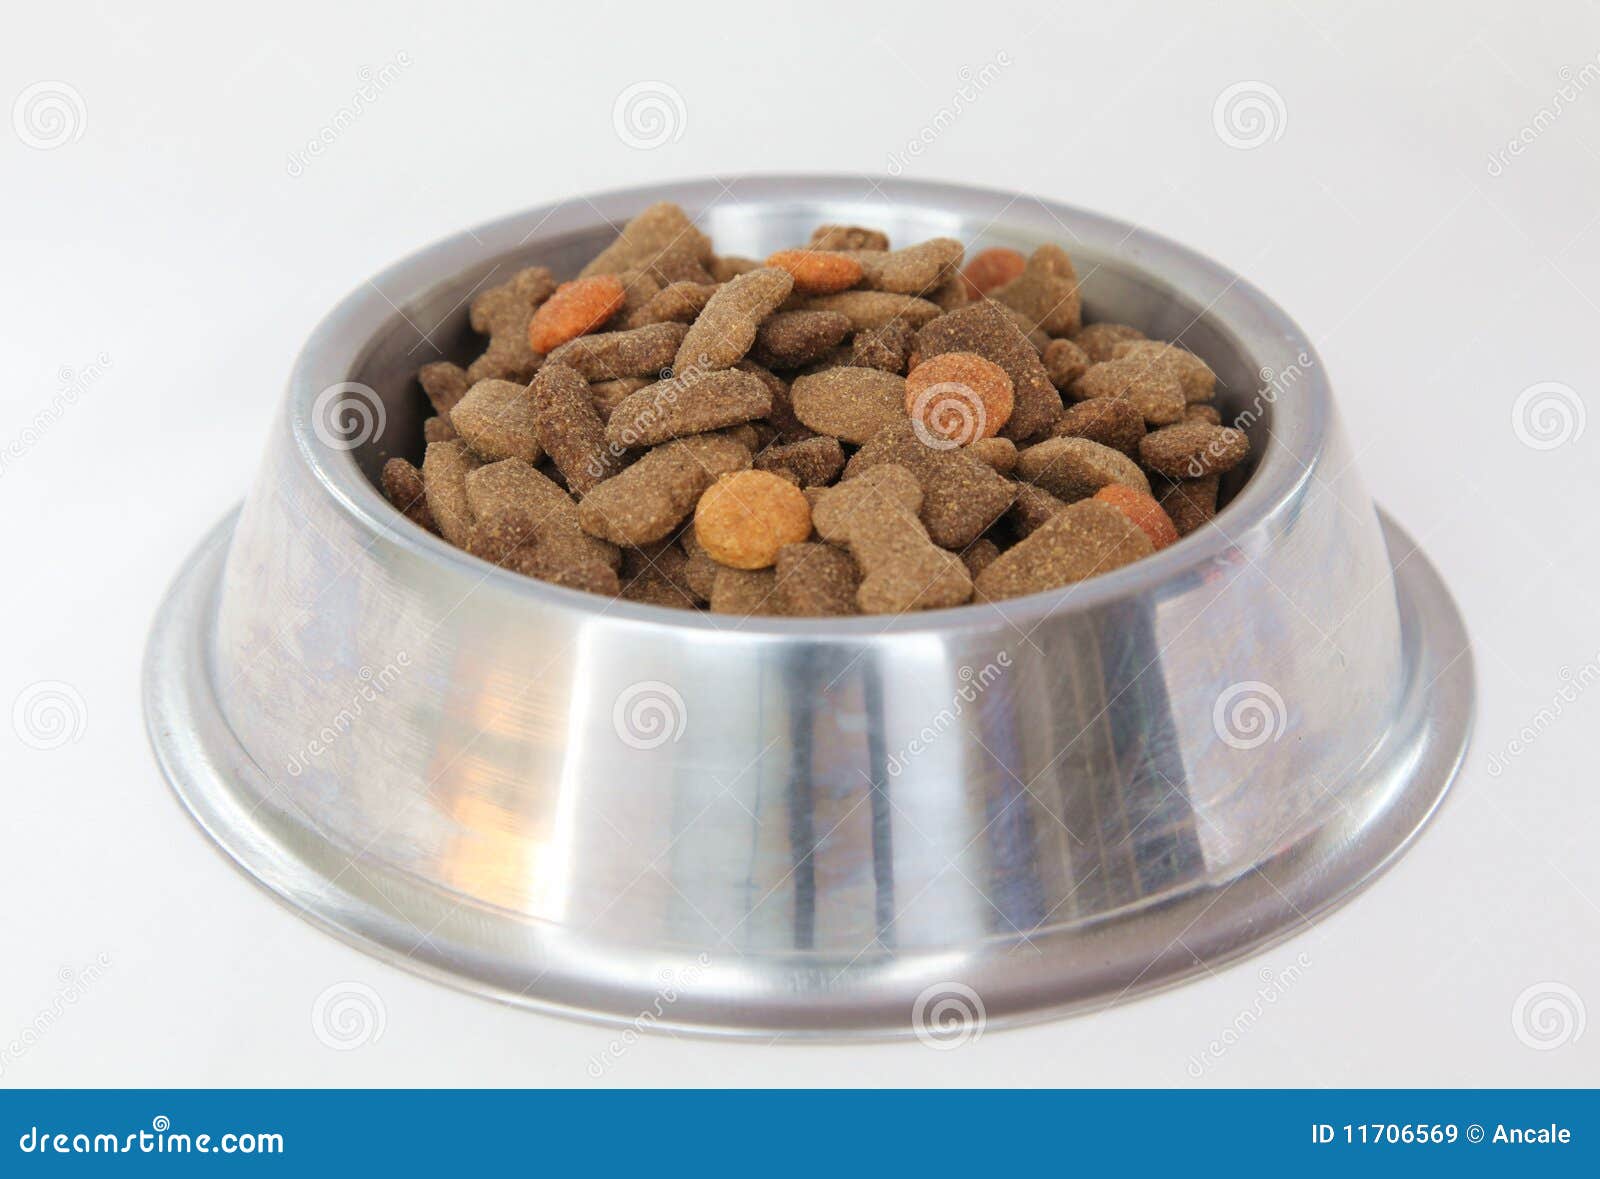 Homemade Pet Food Recipes For Dogs